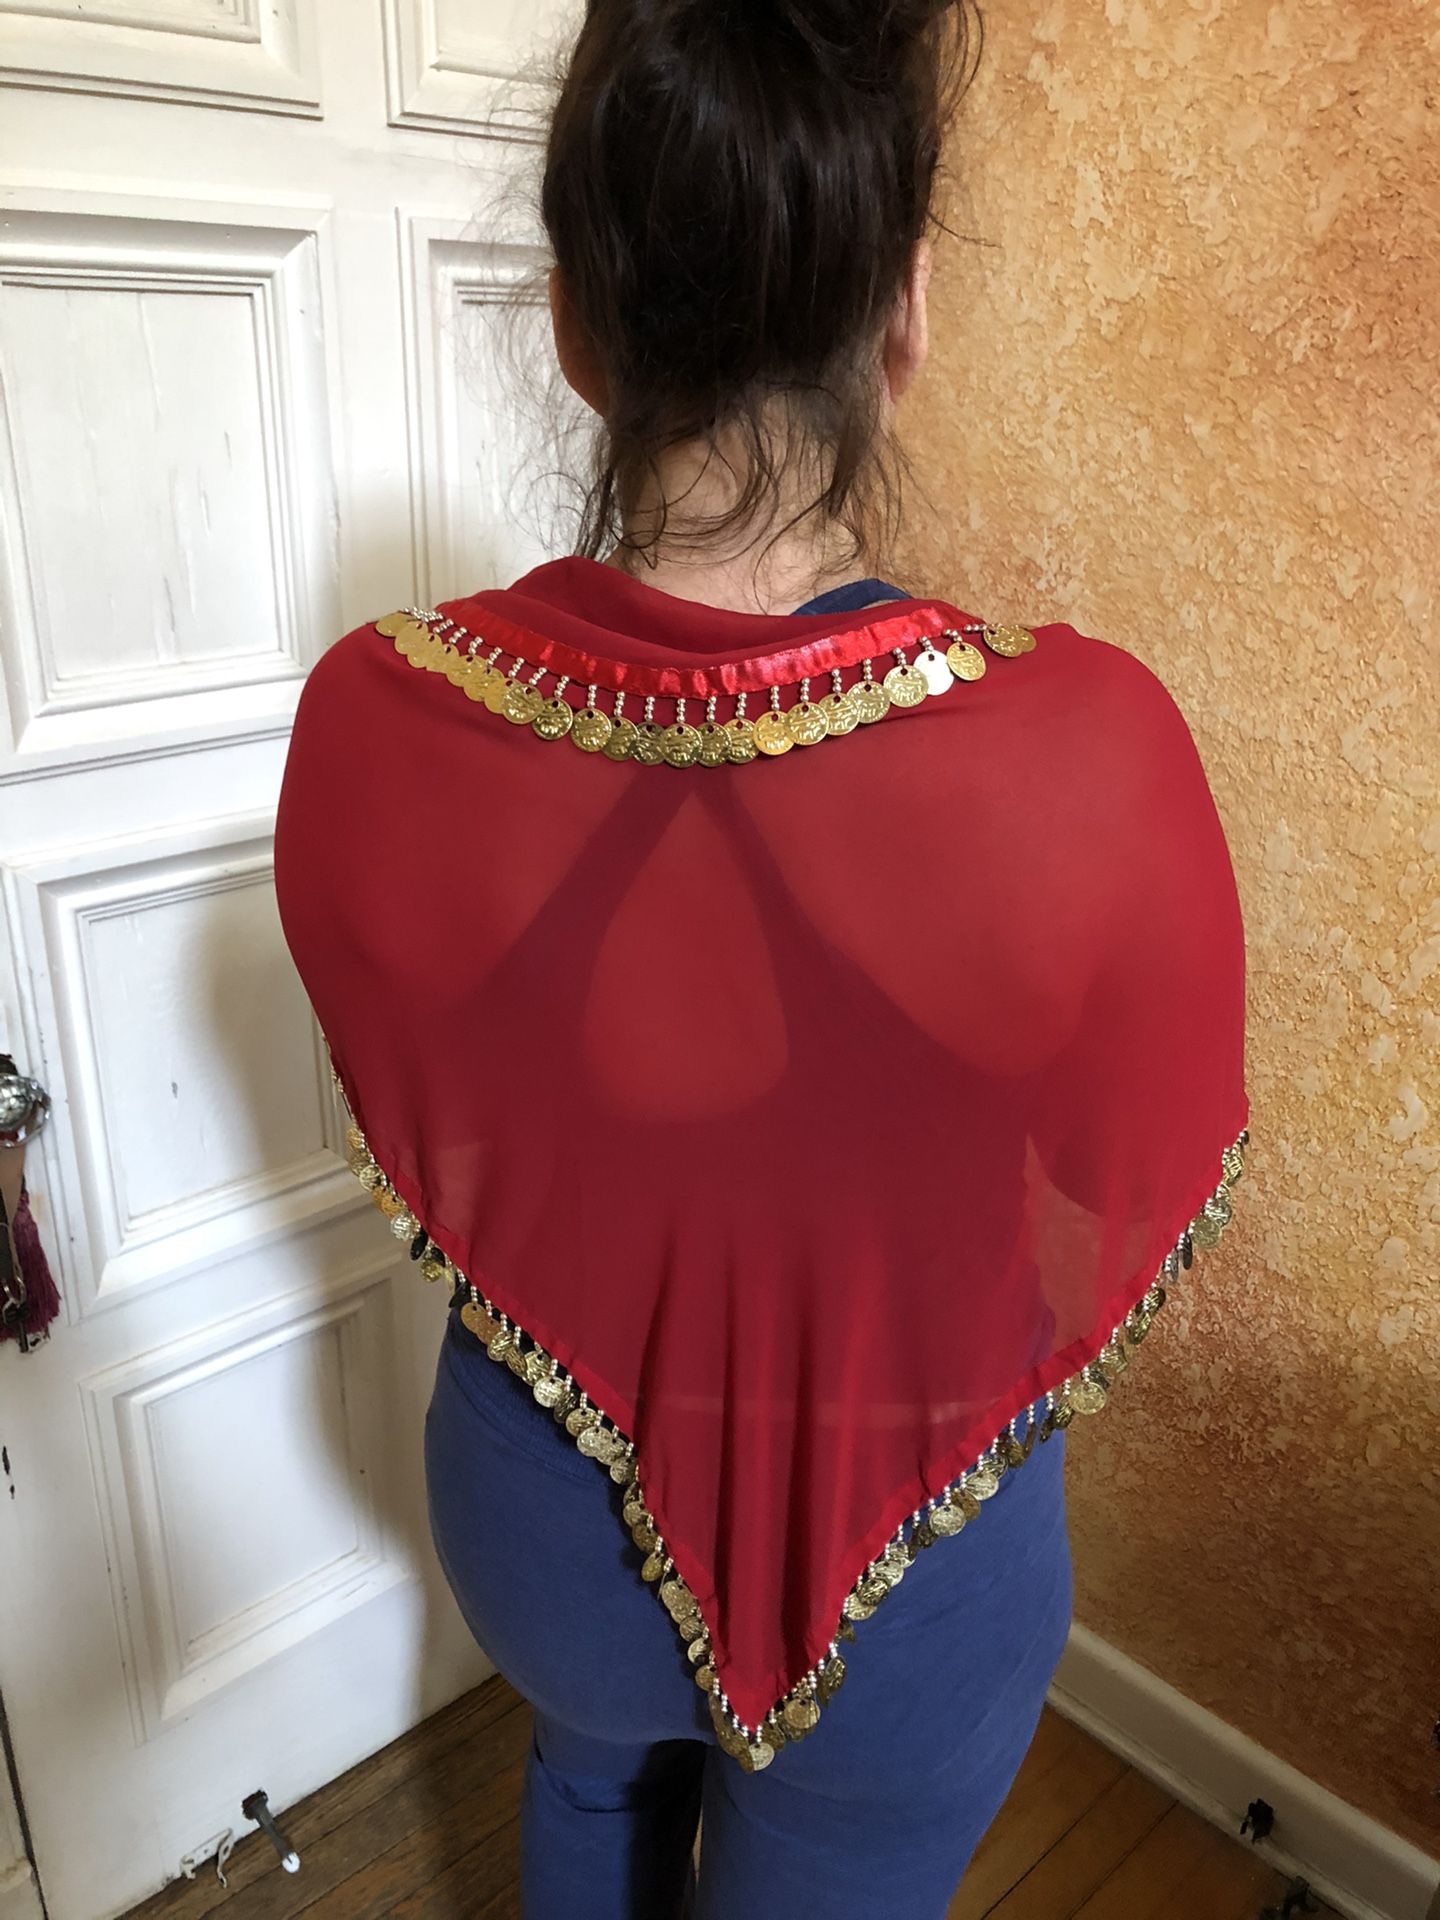 Belly dance red scarf. Halloween costume